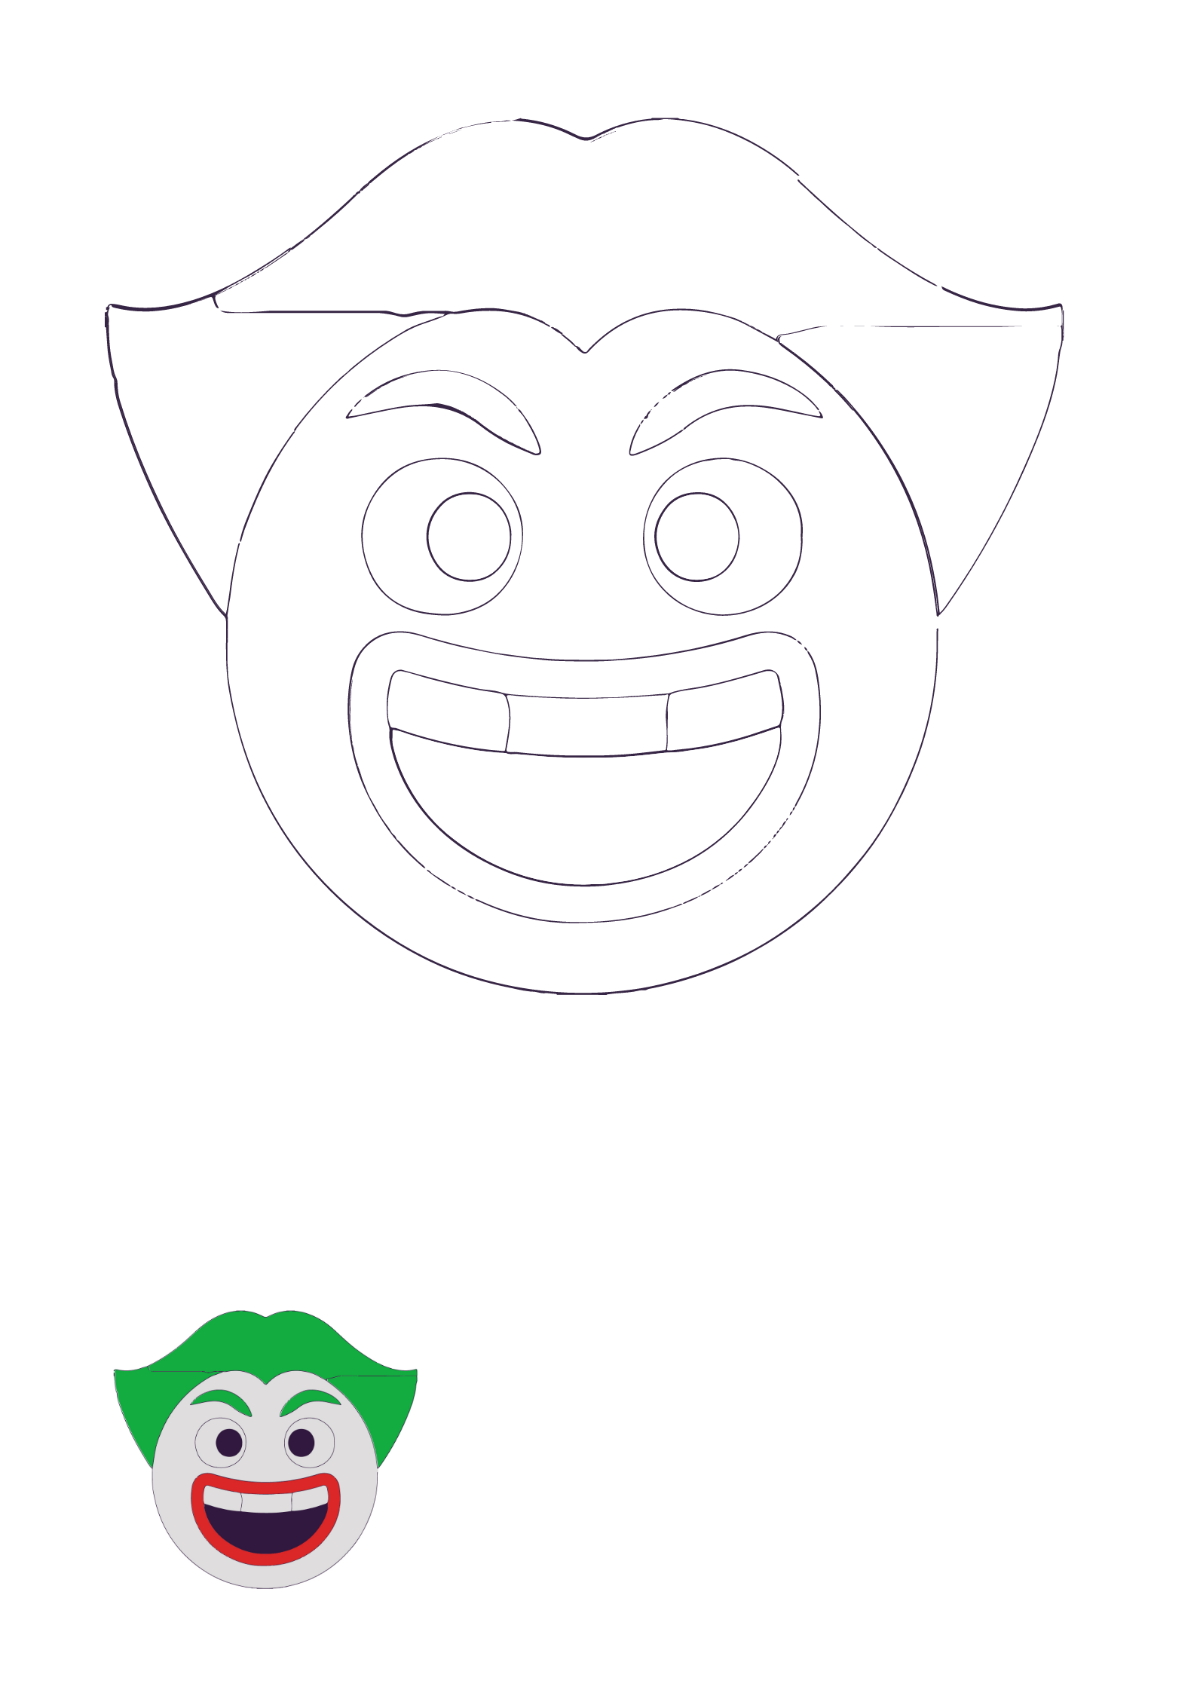 Joker Smiley Coloring Page Template